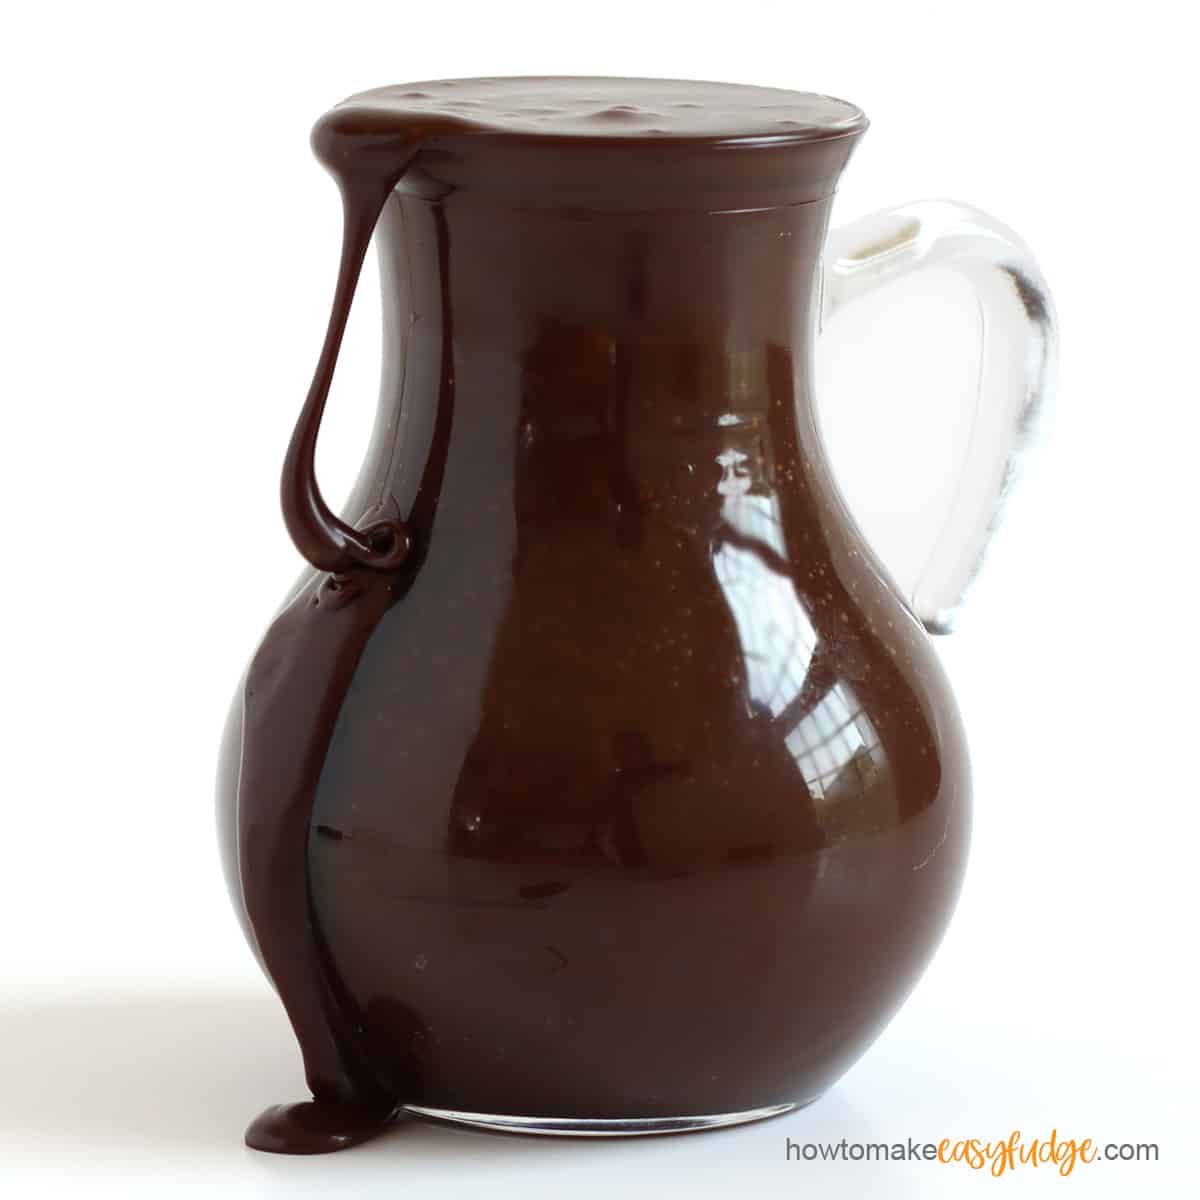 4-ingredient hot fudge sauce in a glass pitcher